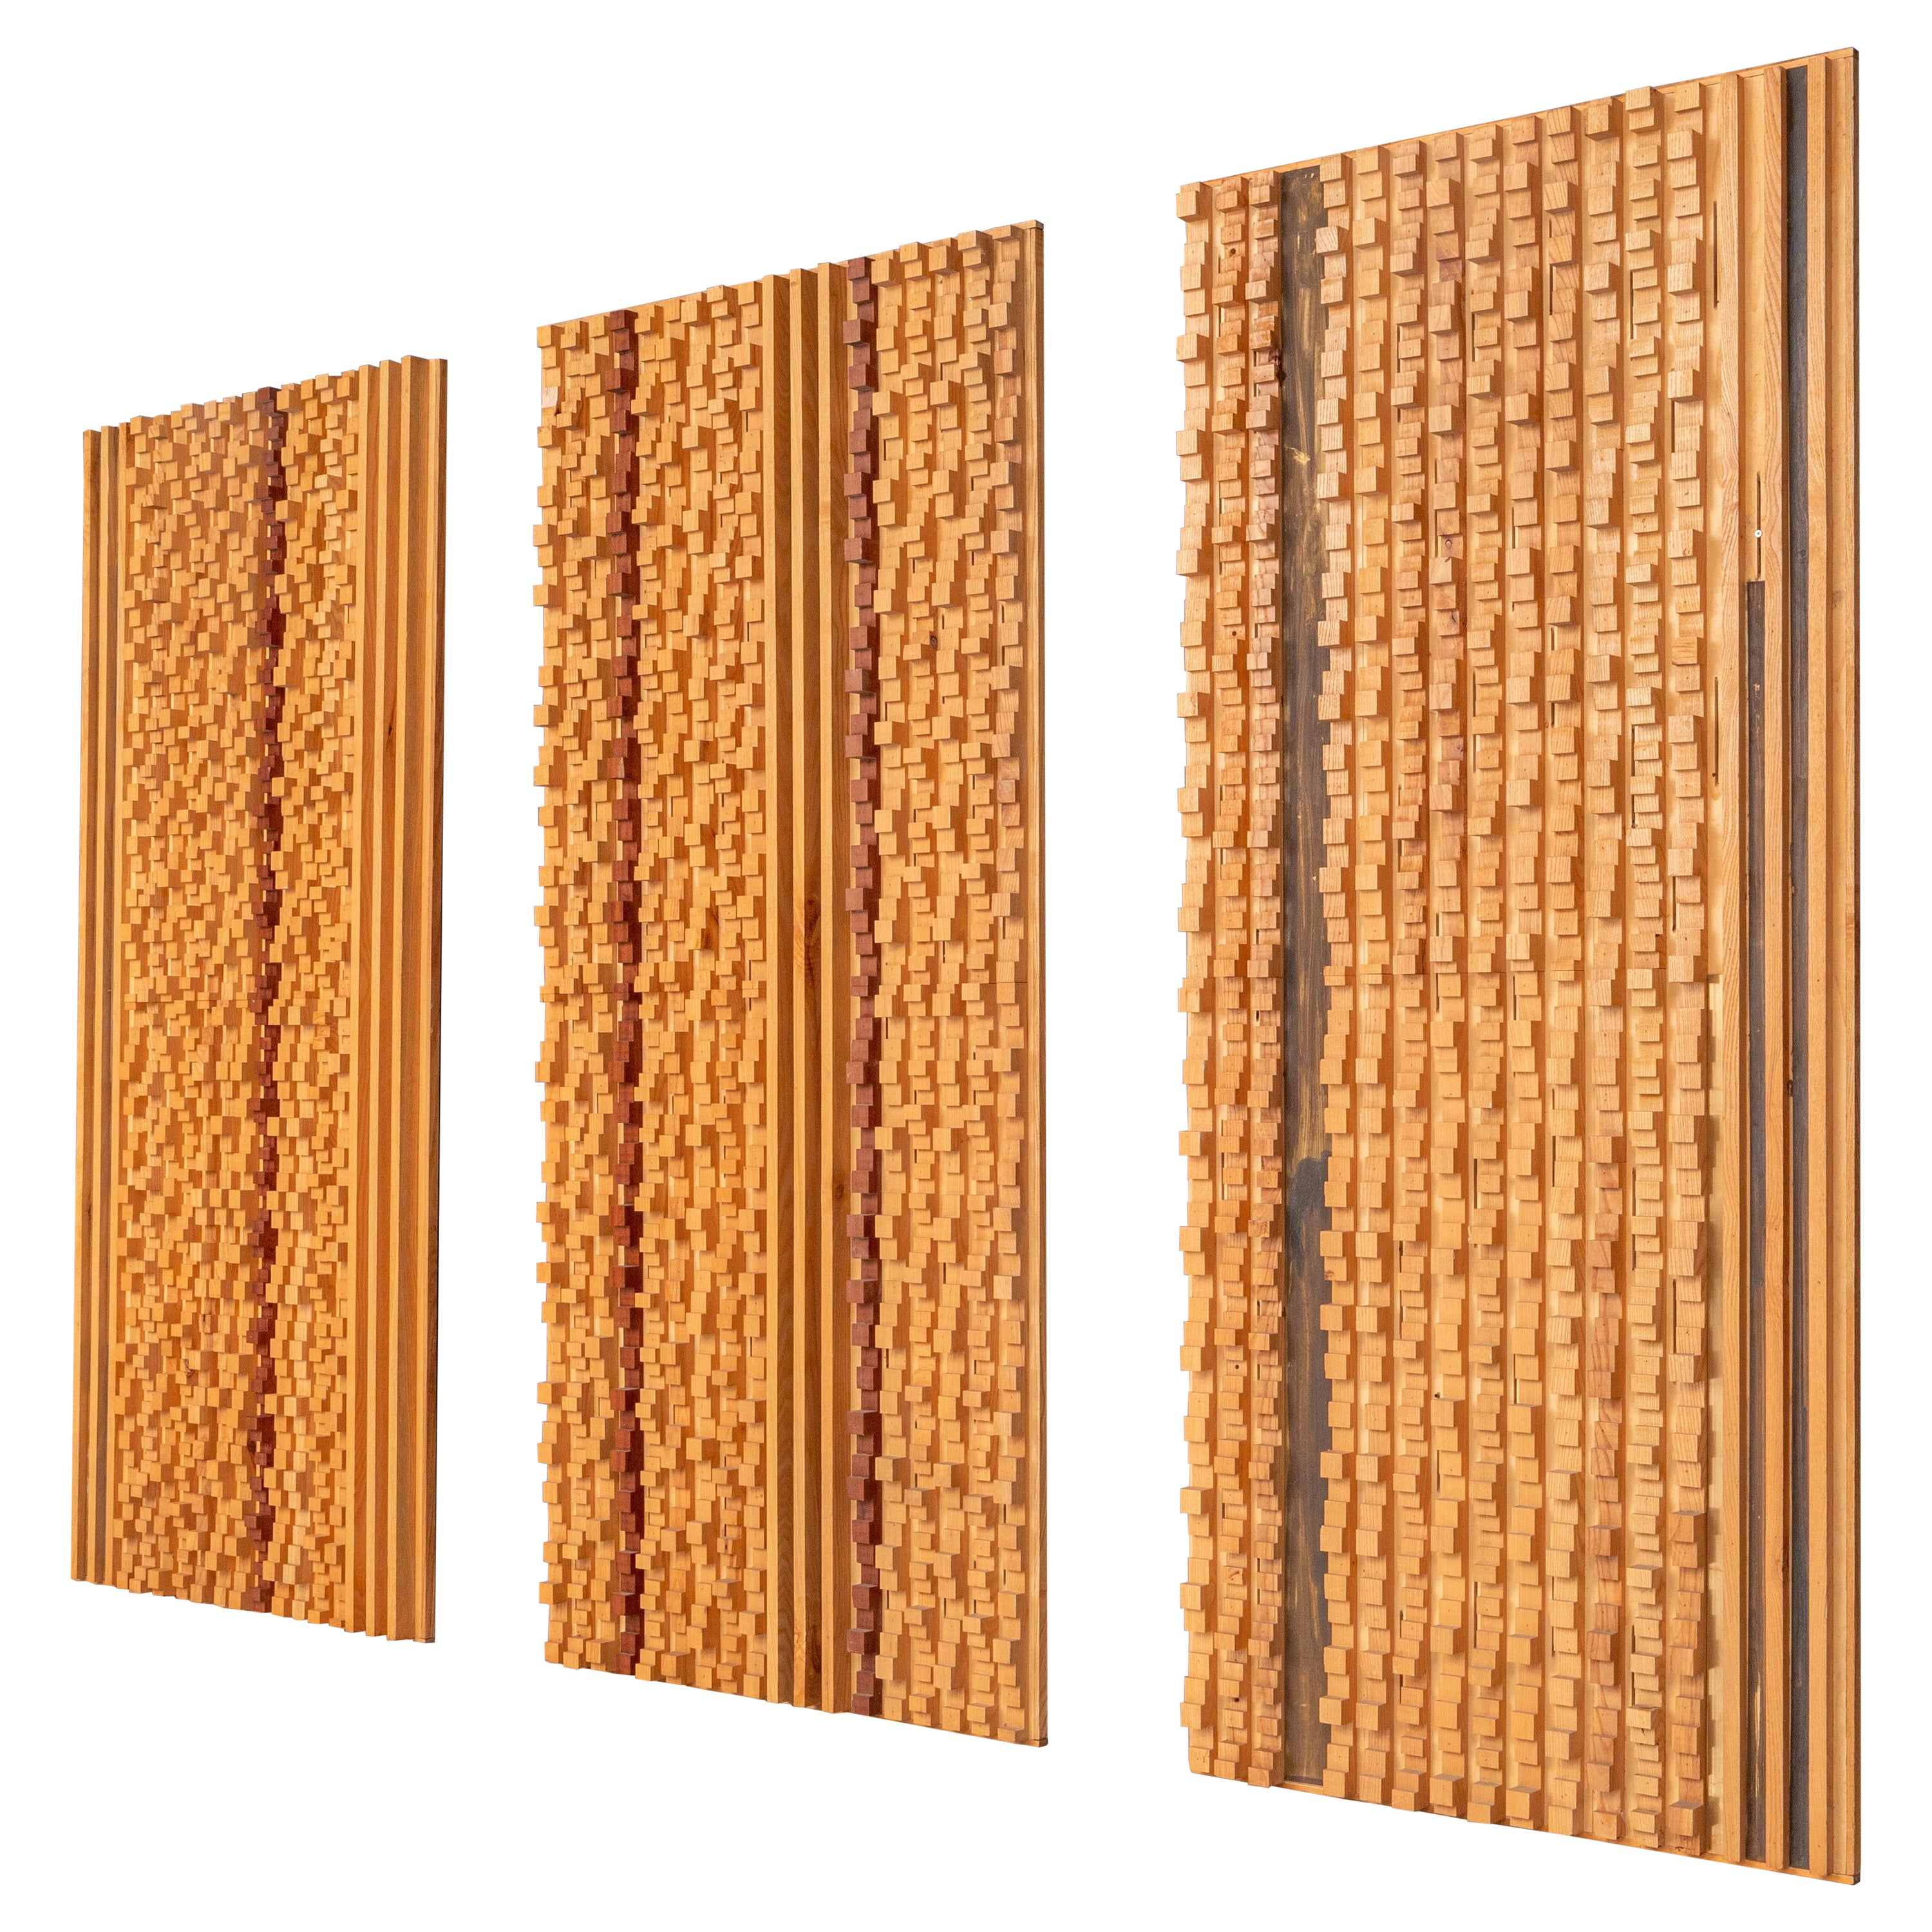 Set of Three Large Wall Panels by Stefano d'Amico, Italy, 1974 For Sale